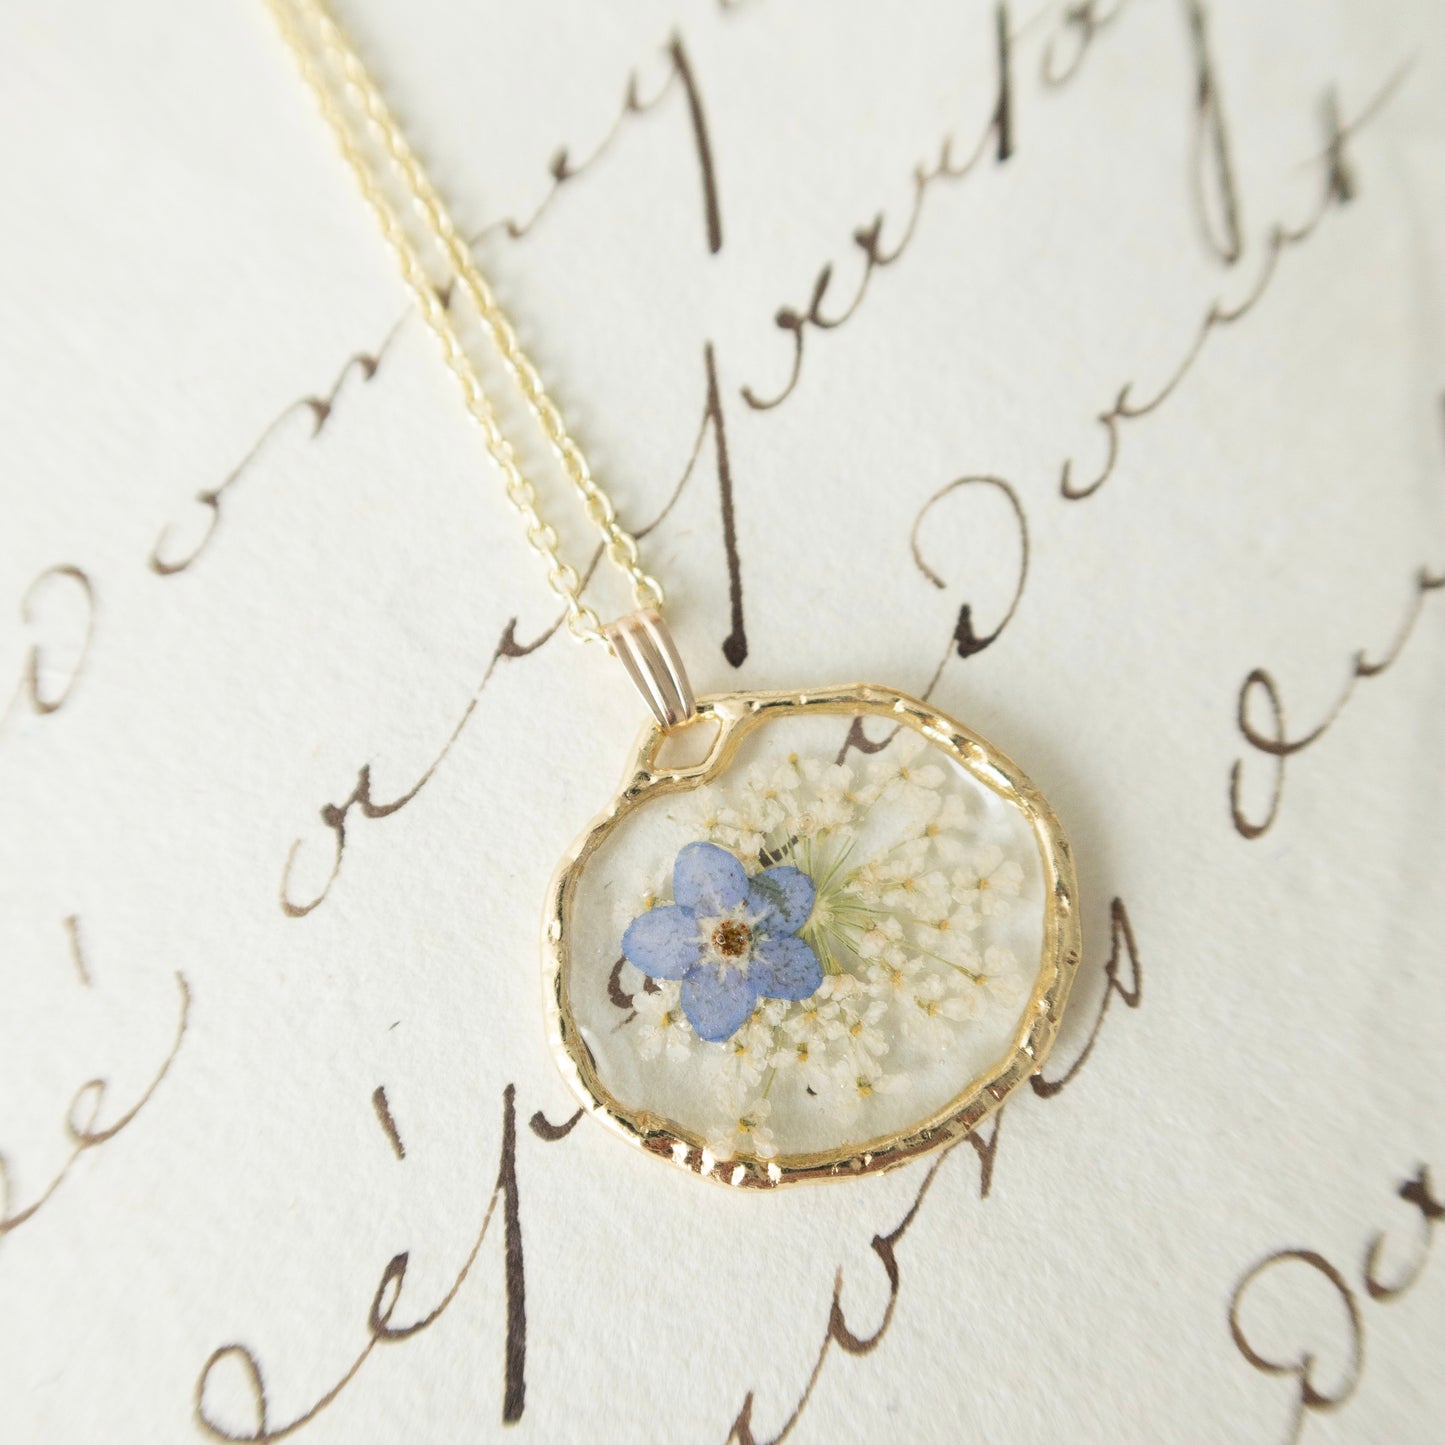 The Trouvaille Blue Forget Me Not Necklace